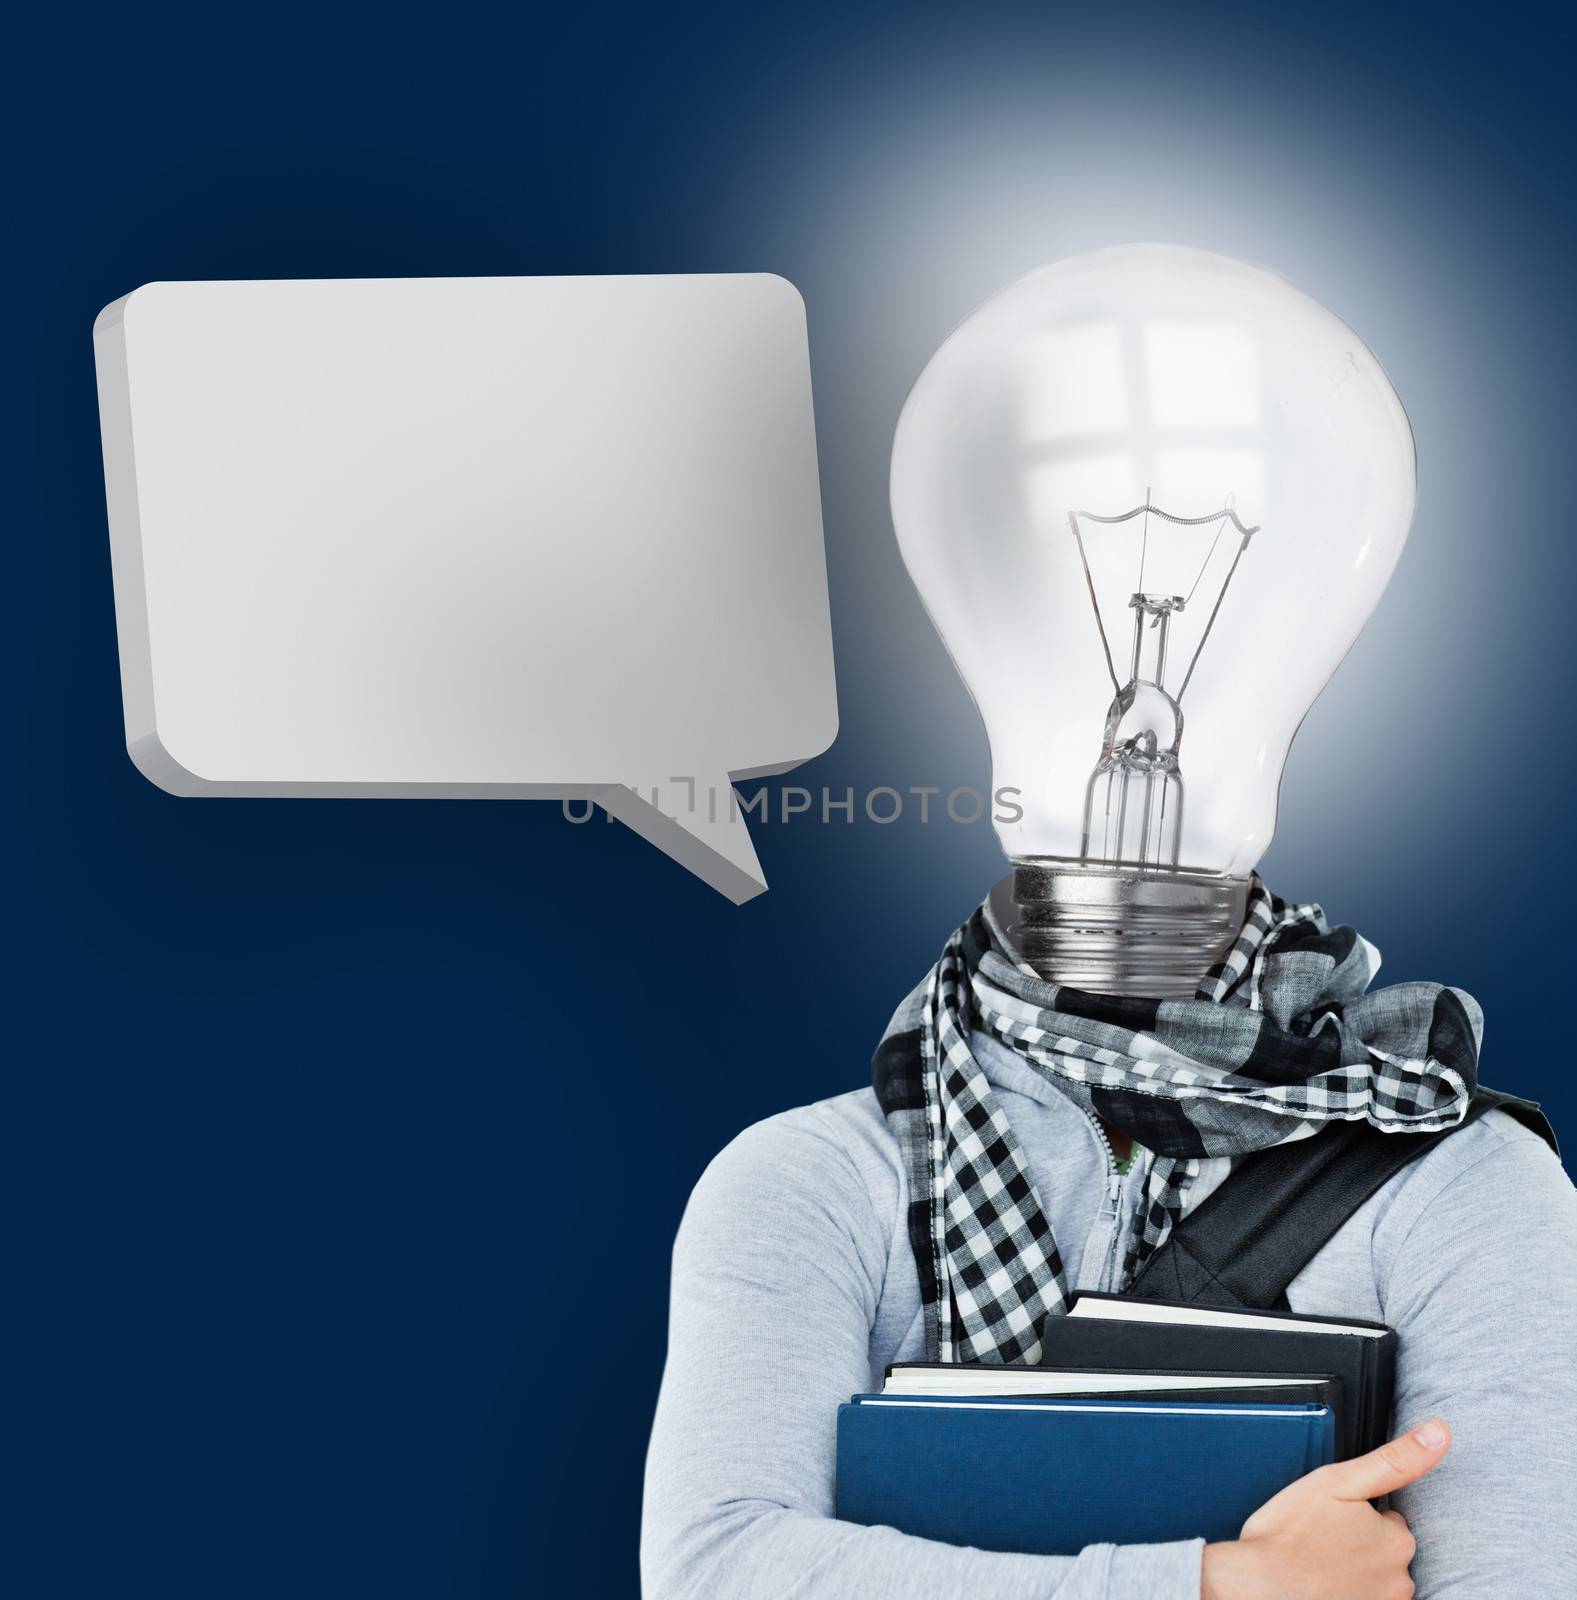 Student with a light bulb head and blank speech bubble on blue background